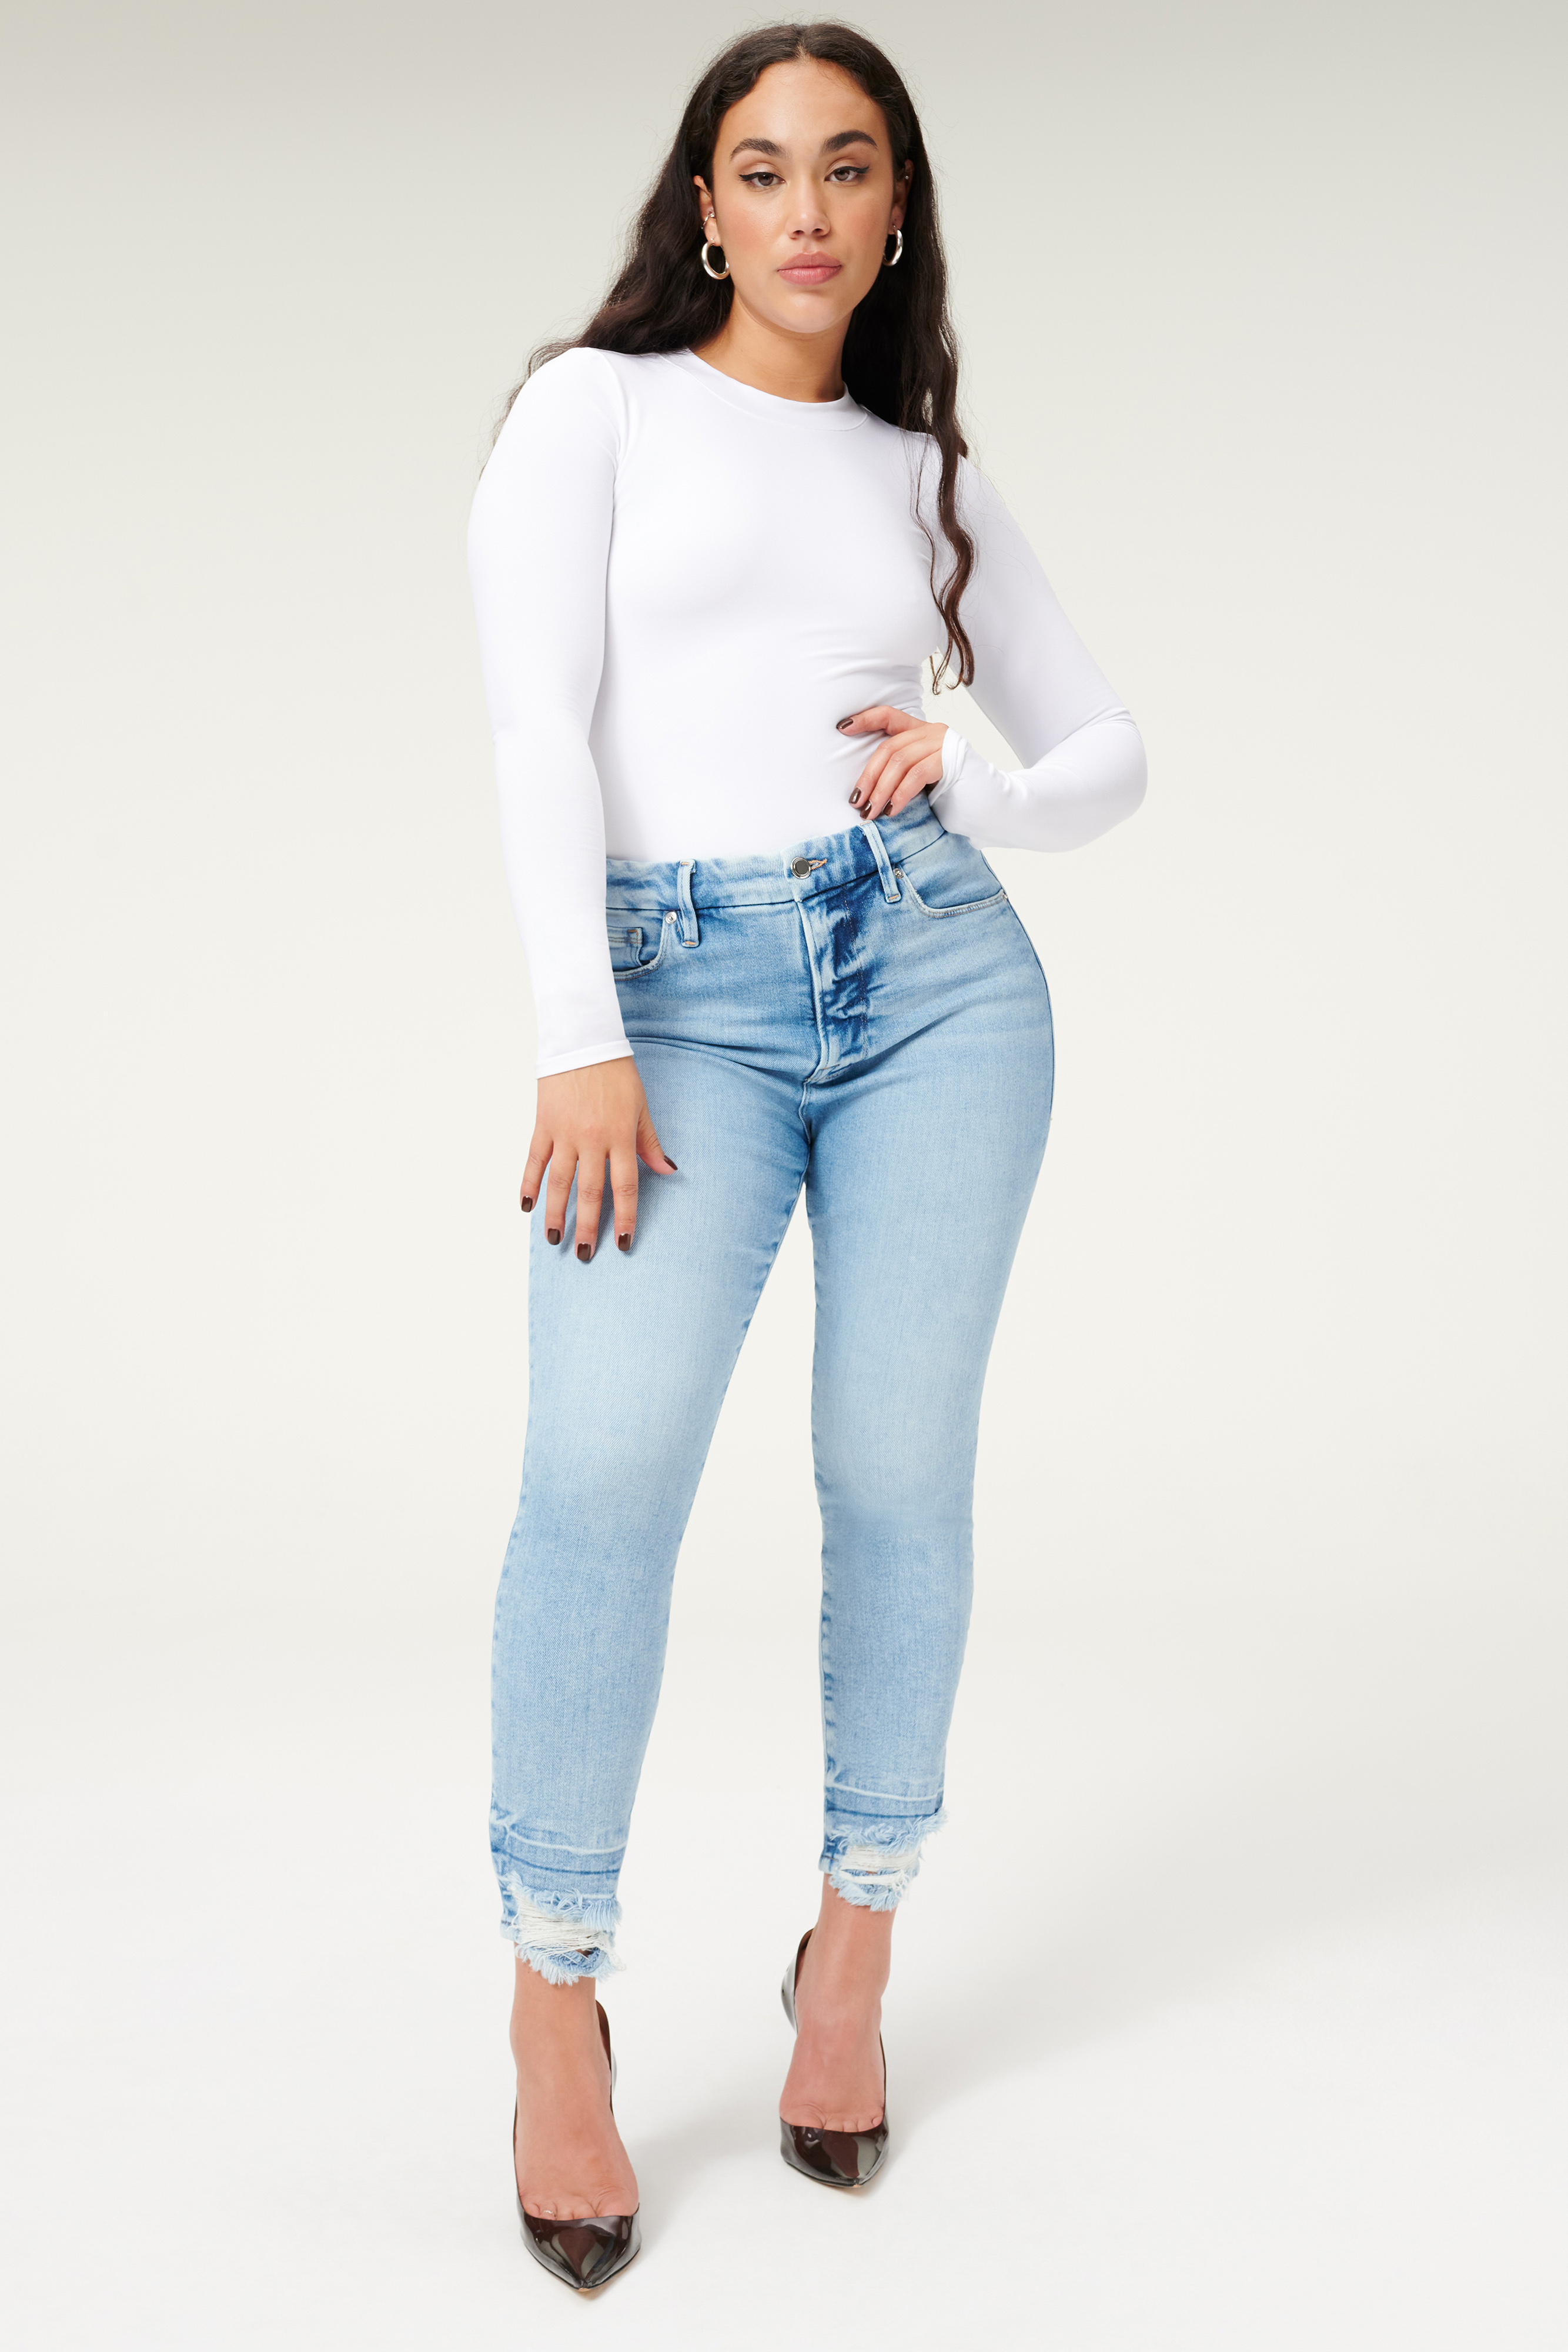 Styled with GOOD WAIST SKINNY CROPPED JEANS | BLUE856